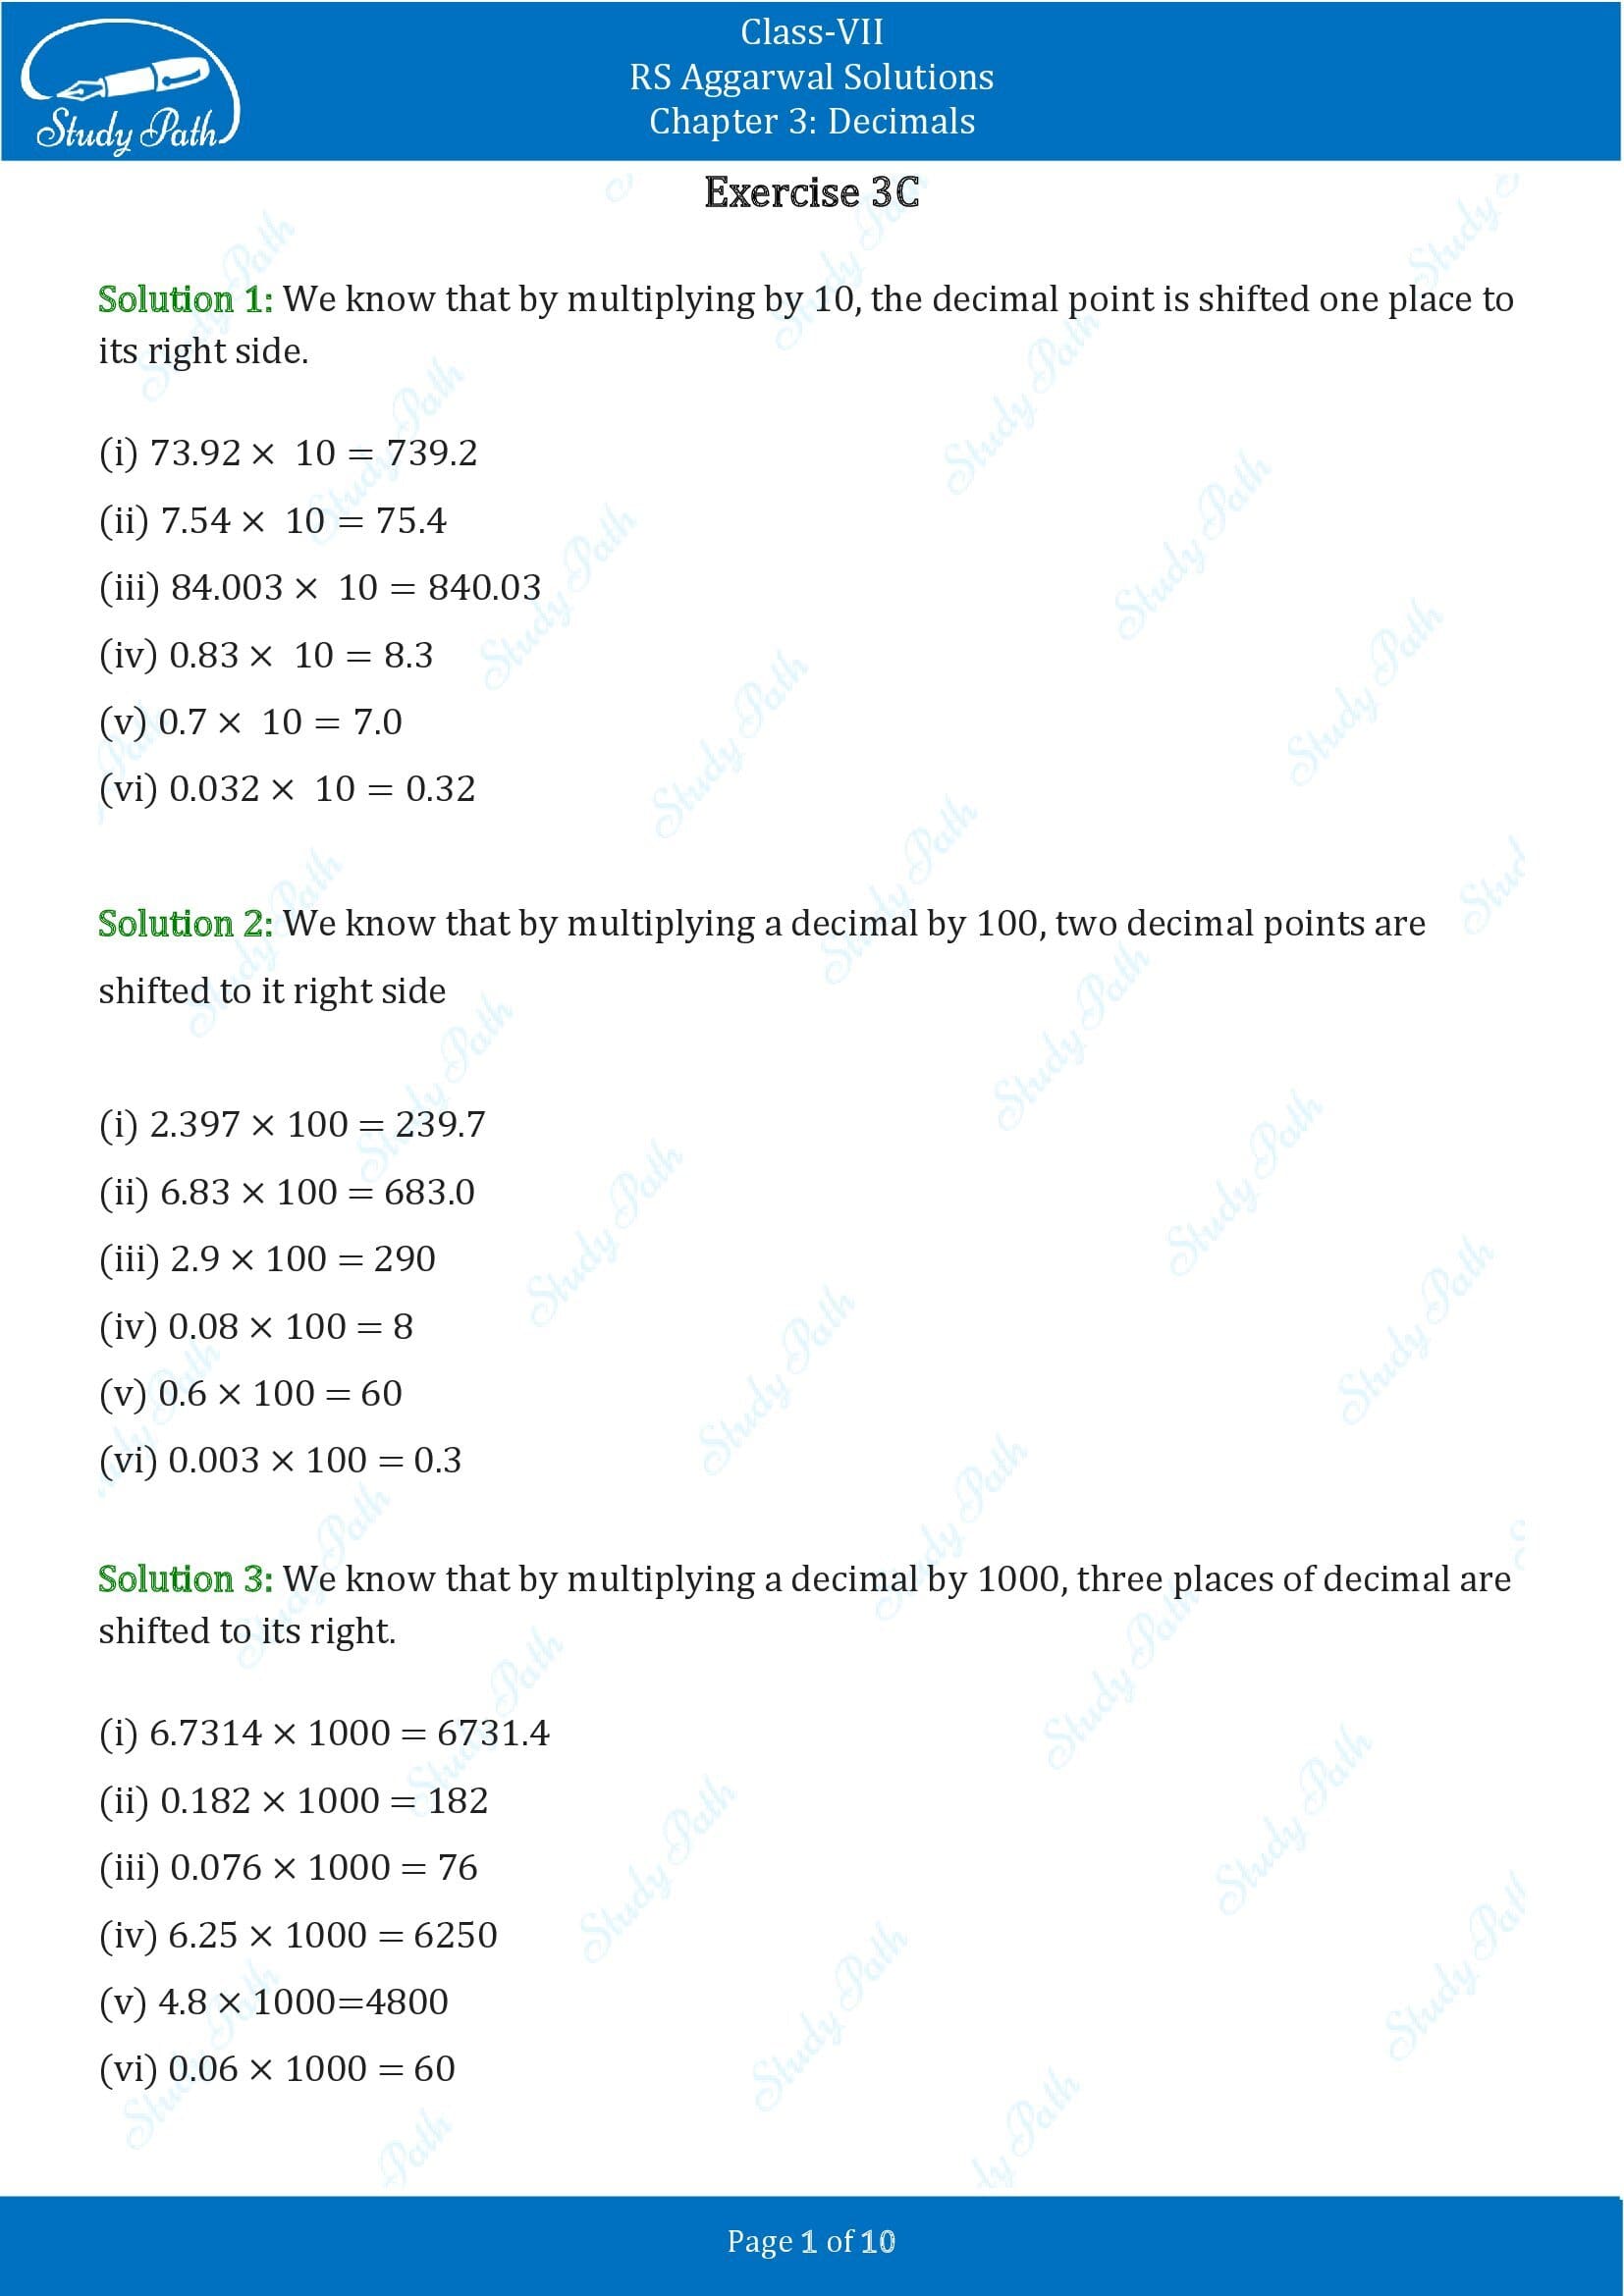 RS Aggarwal Solutions Class 7 Chapter 3 Decimals Exercise 3C 001